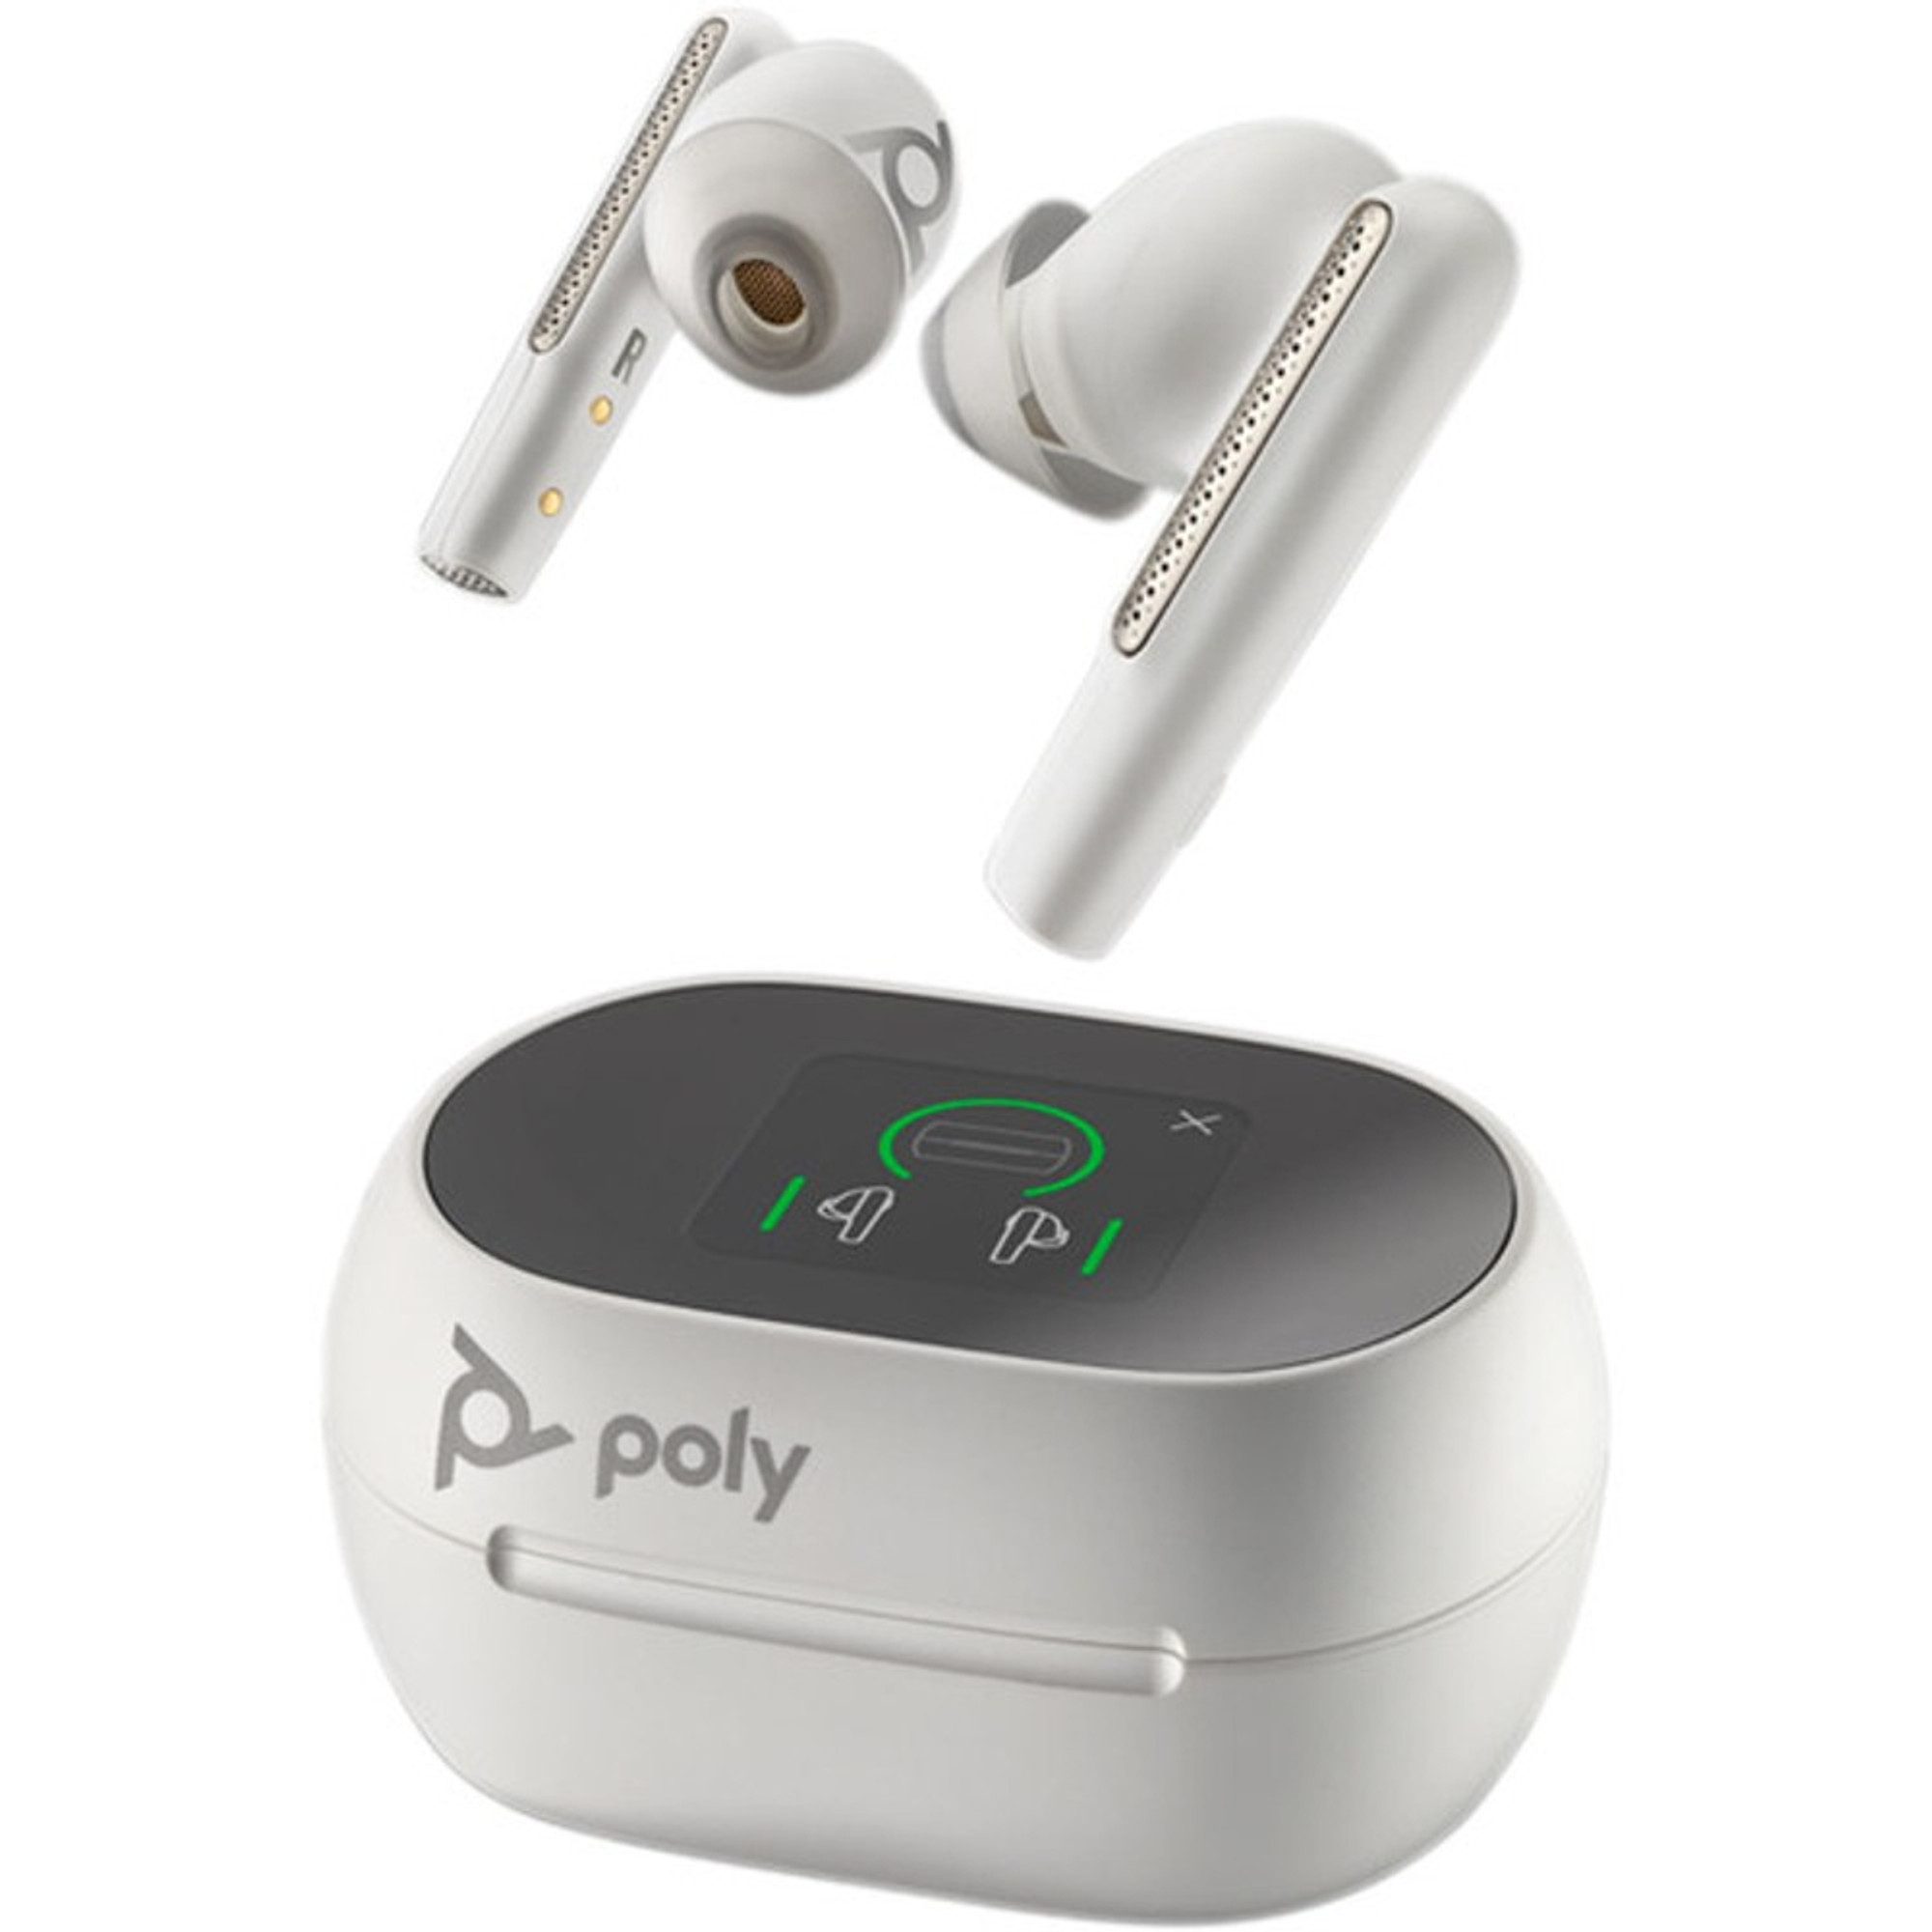 Poly Plantronics Plantronics Earbuds Plantronics | 7Y8G5AA) Free Voyager Wireless Charging USB-A, Plantronics HEADPHONES Headsets Voyager 60+ | Free (White) With | 60+ | Touchscreen / Poly Singapore Poly (216754-01 Case UC Poly True